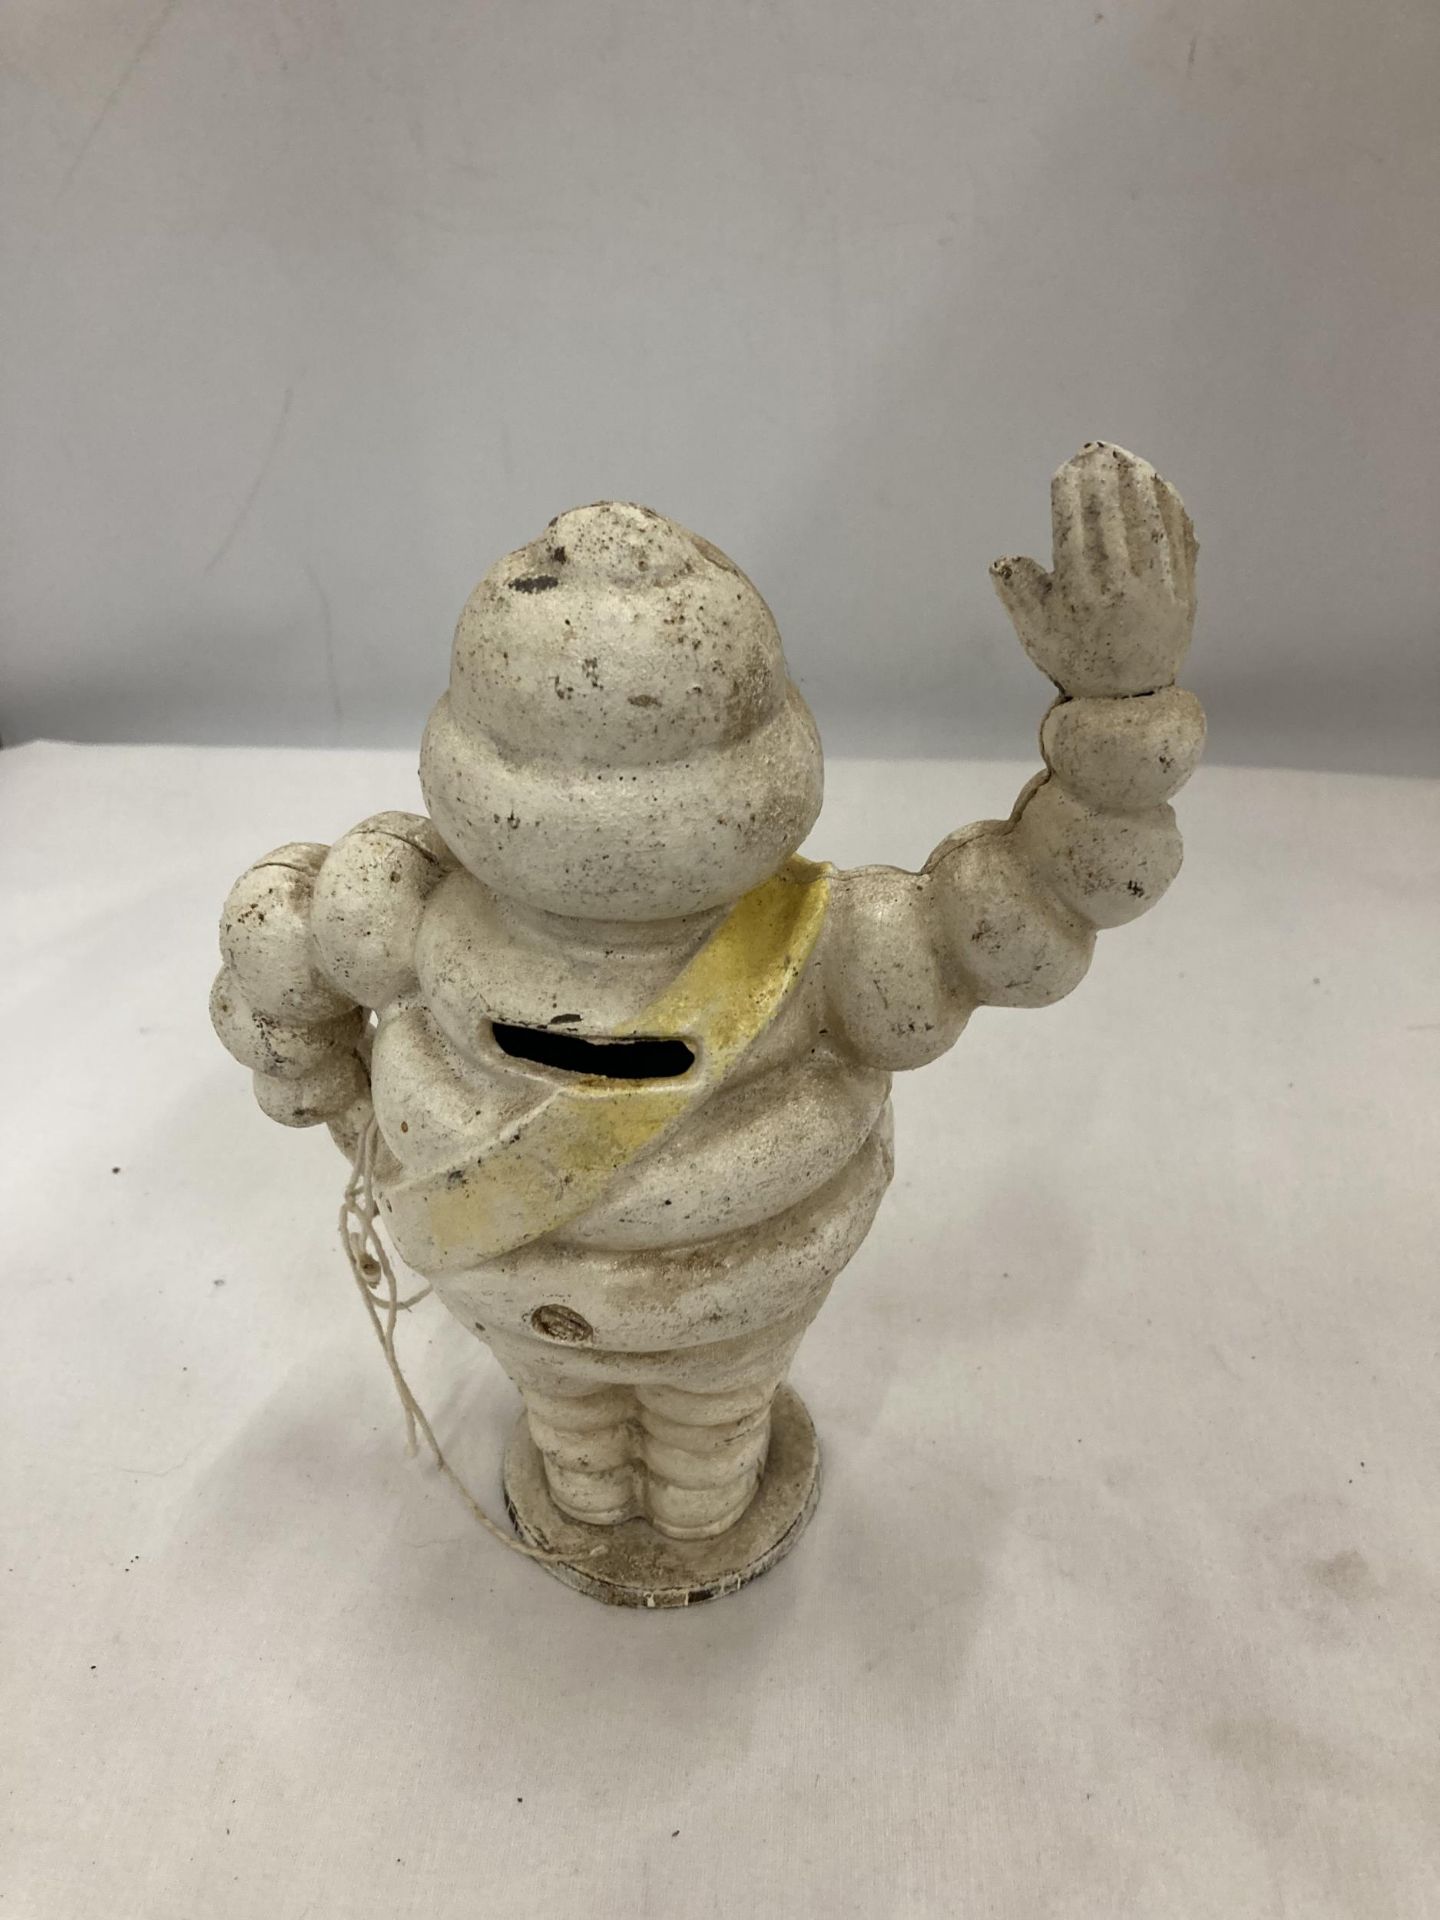 A CAST MICHELIN MAN FIGURE APPROX 21 CM TALL - Image 2 of 4